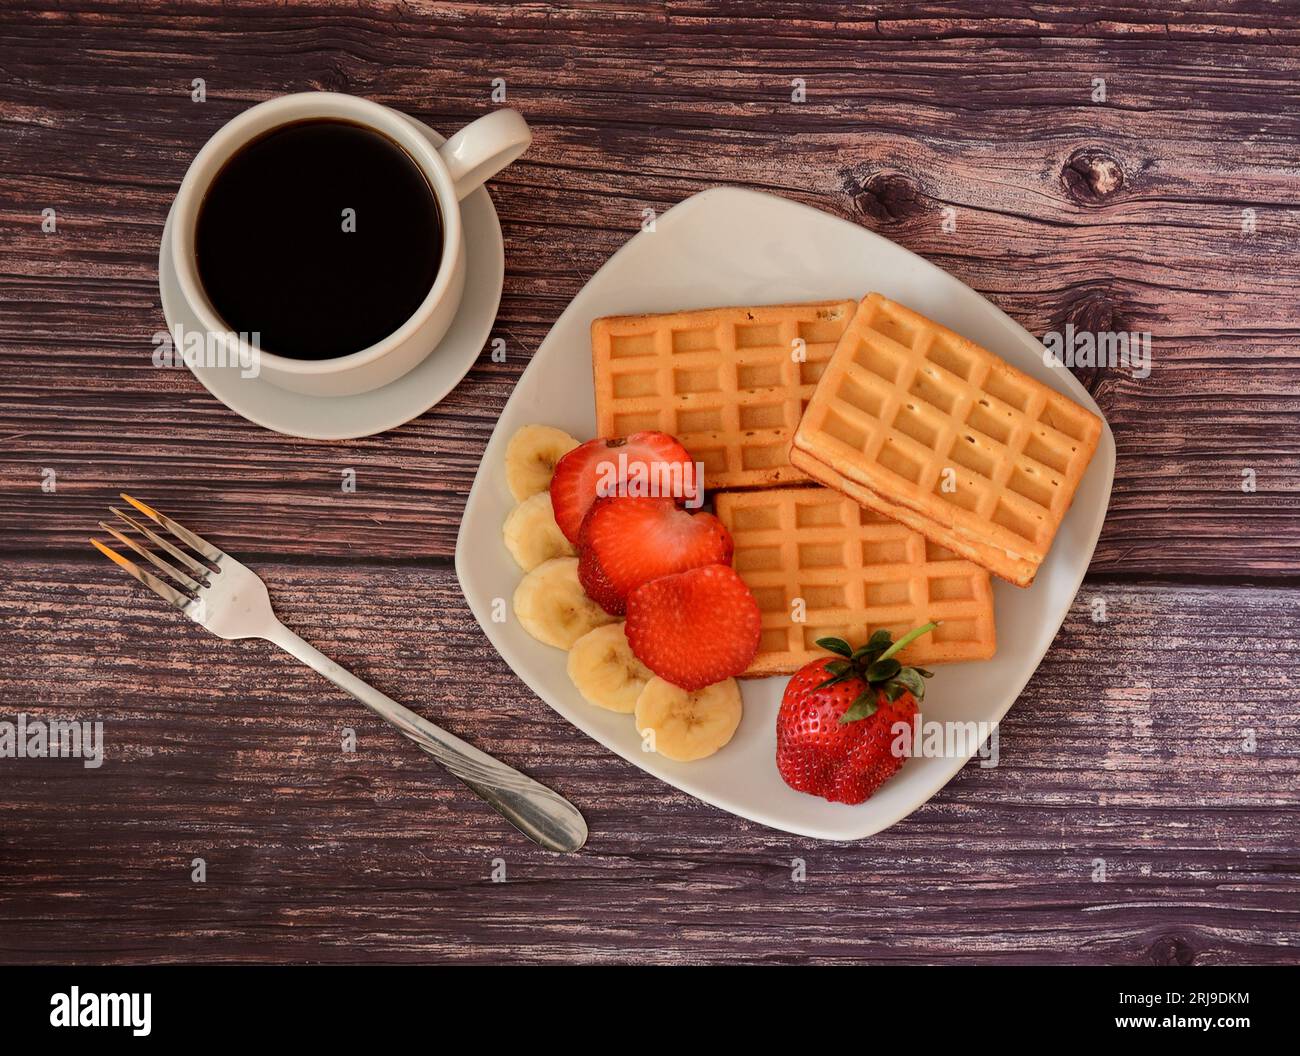 A cup of black coffee on a saucer, a fork and a plate with fresh Viennese waffles with strawberries and ripe banana slices on a wooden table. Top view Stock Photo